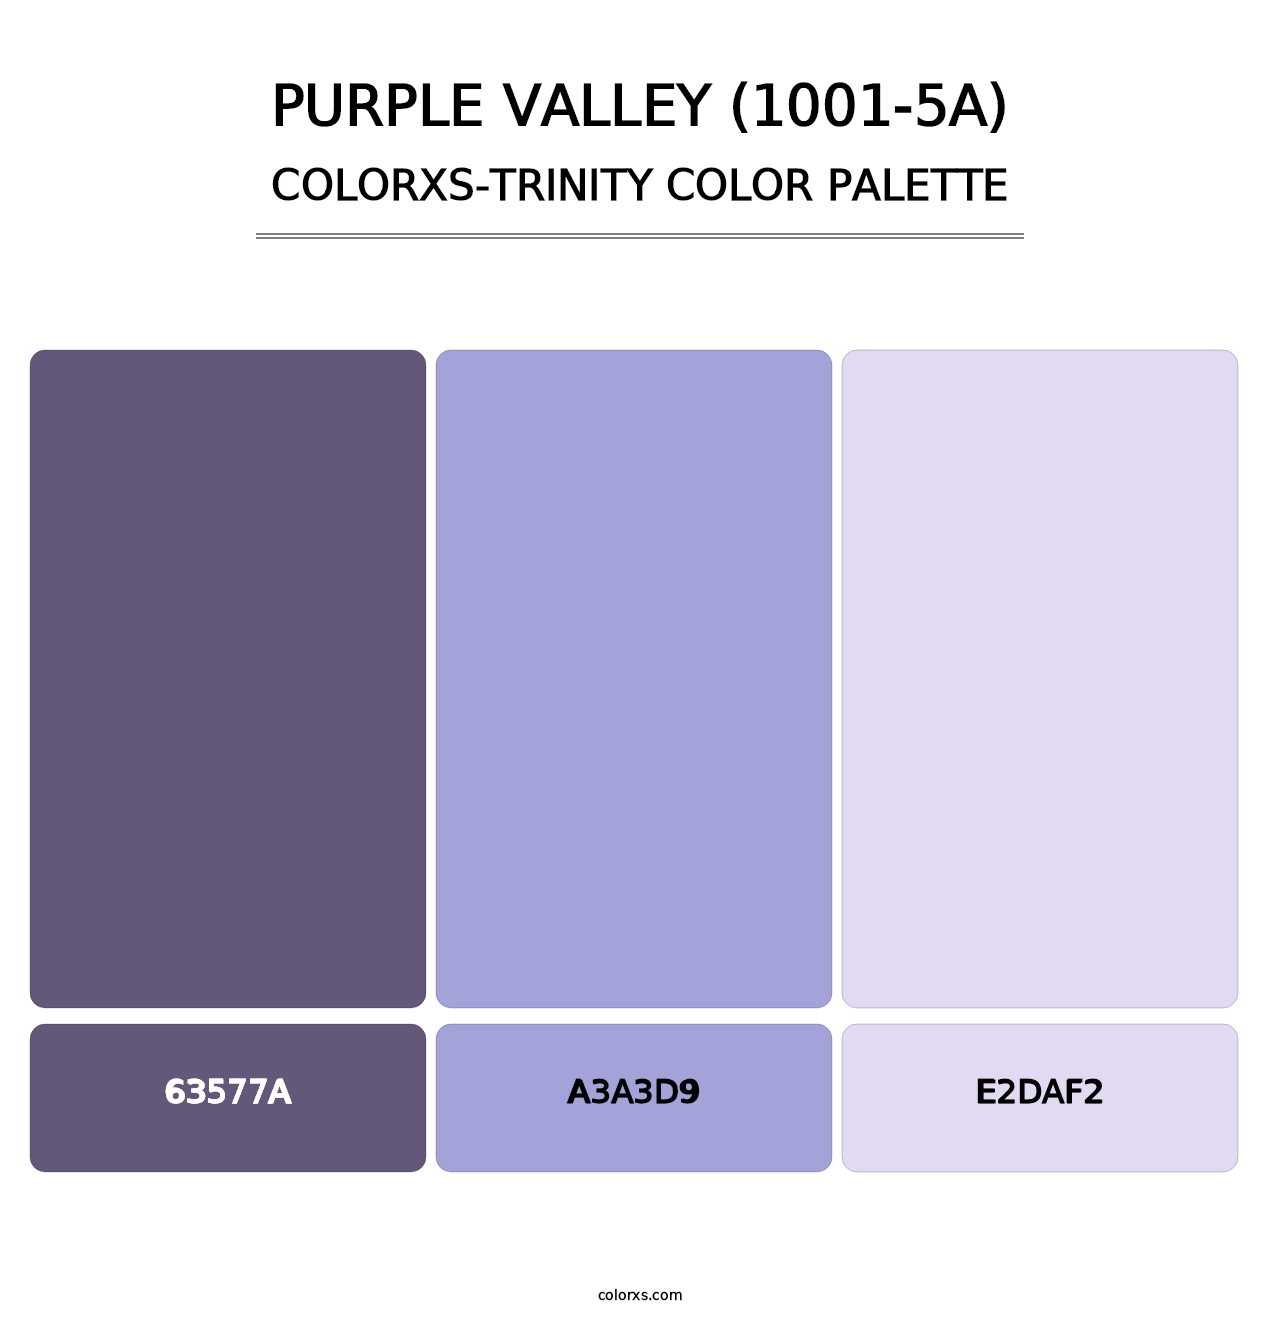 Purple Valley (1001-5A) - Colorxs Trinity Palette